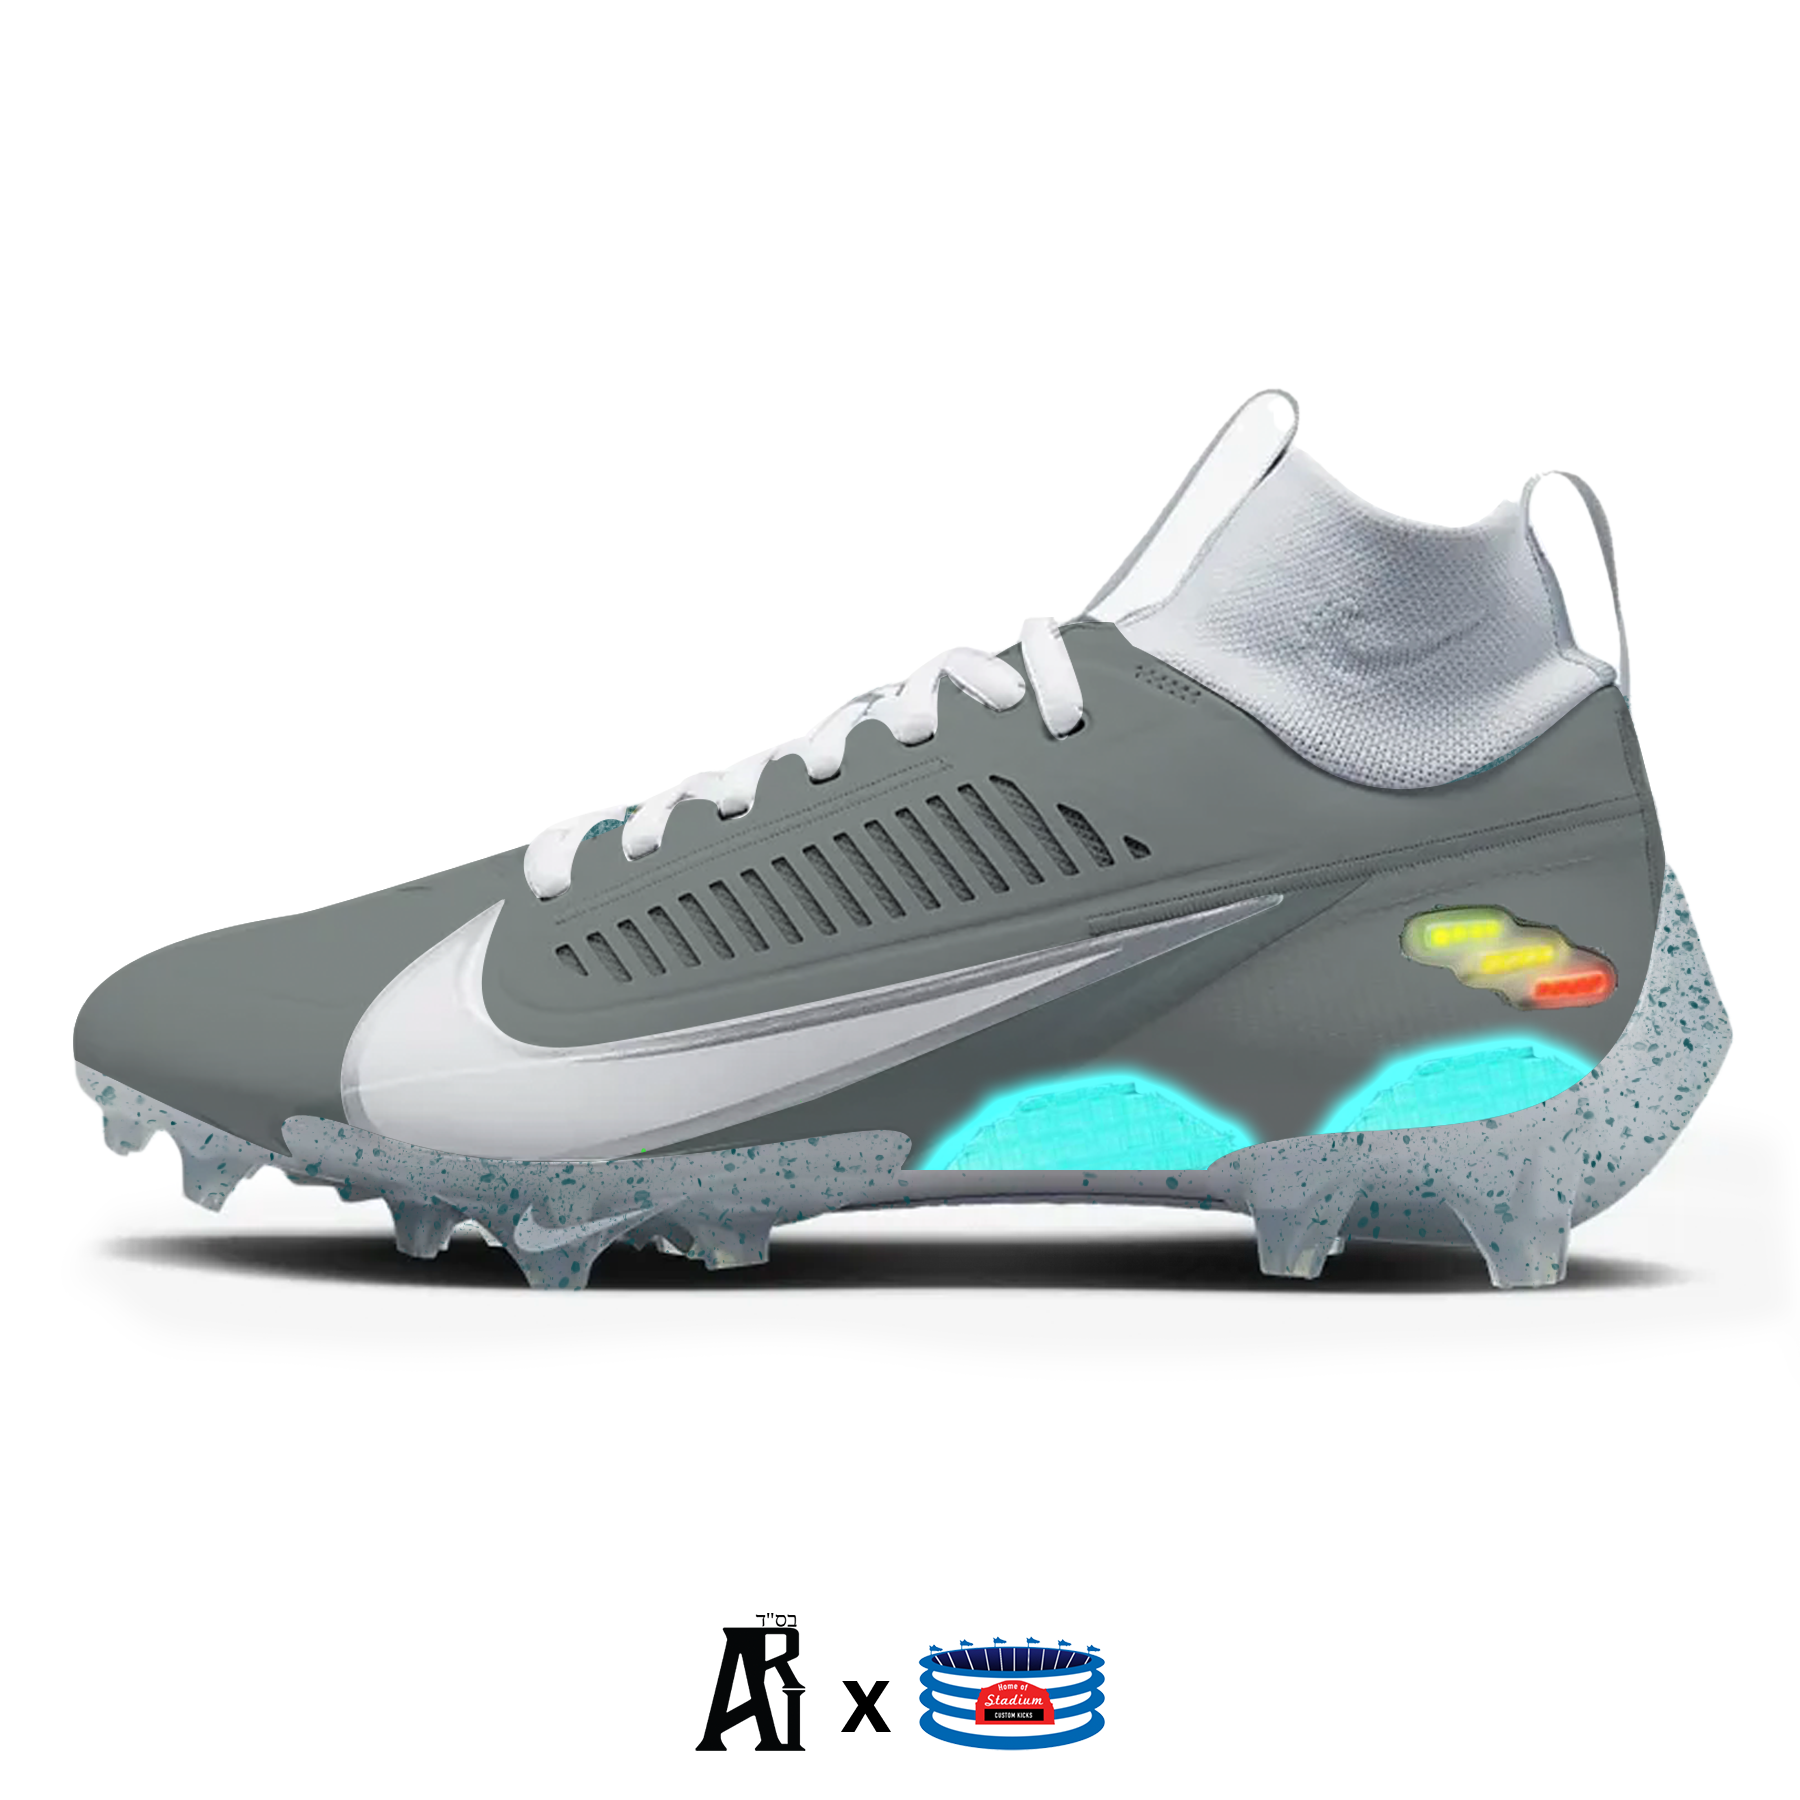 Football Cleats & Spikes.